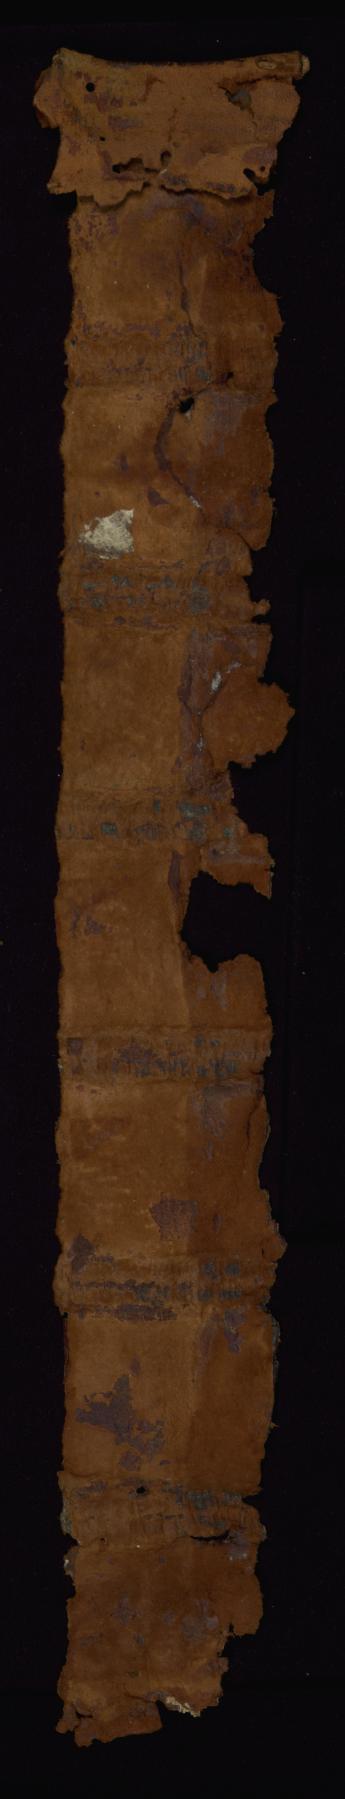 Image for Binding from Bible